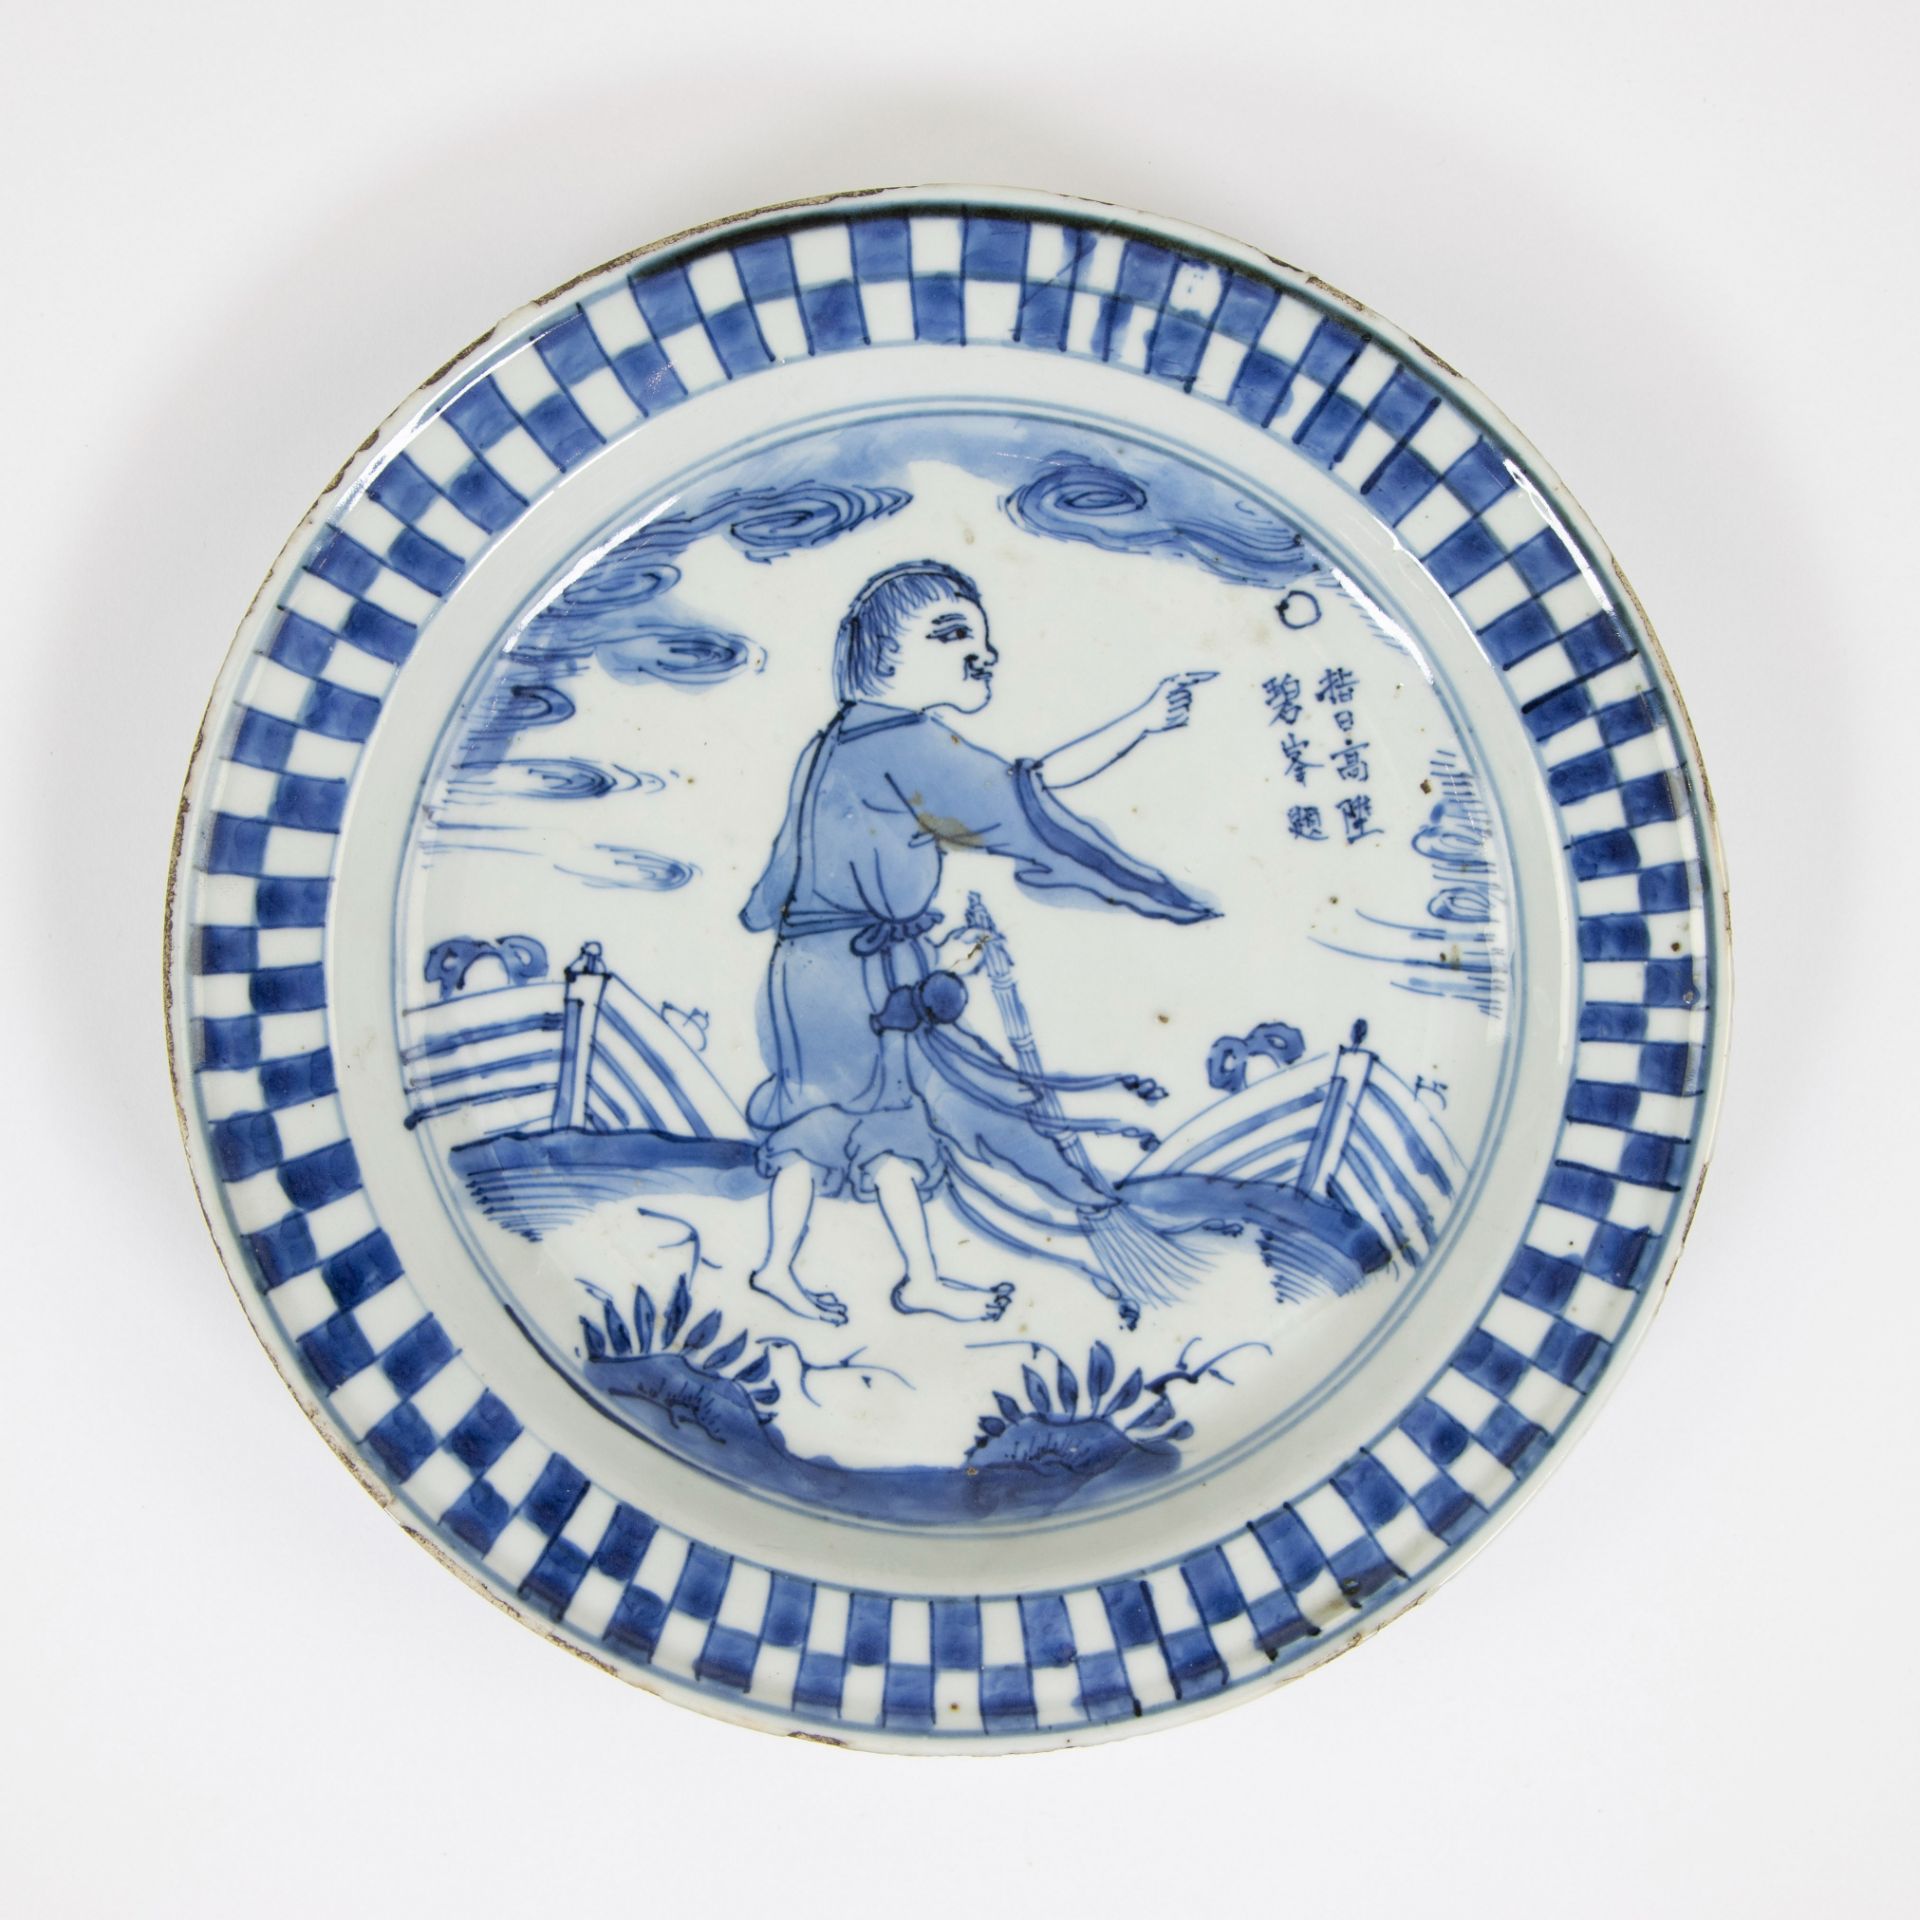 Chinese plate MING dynasty, ca 1625-1630, porcelain decorated in underglaze cobalt blue.